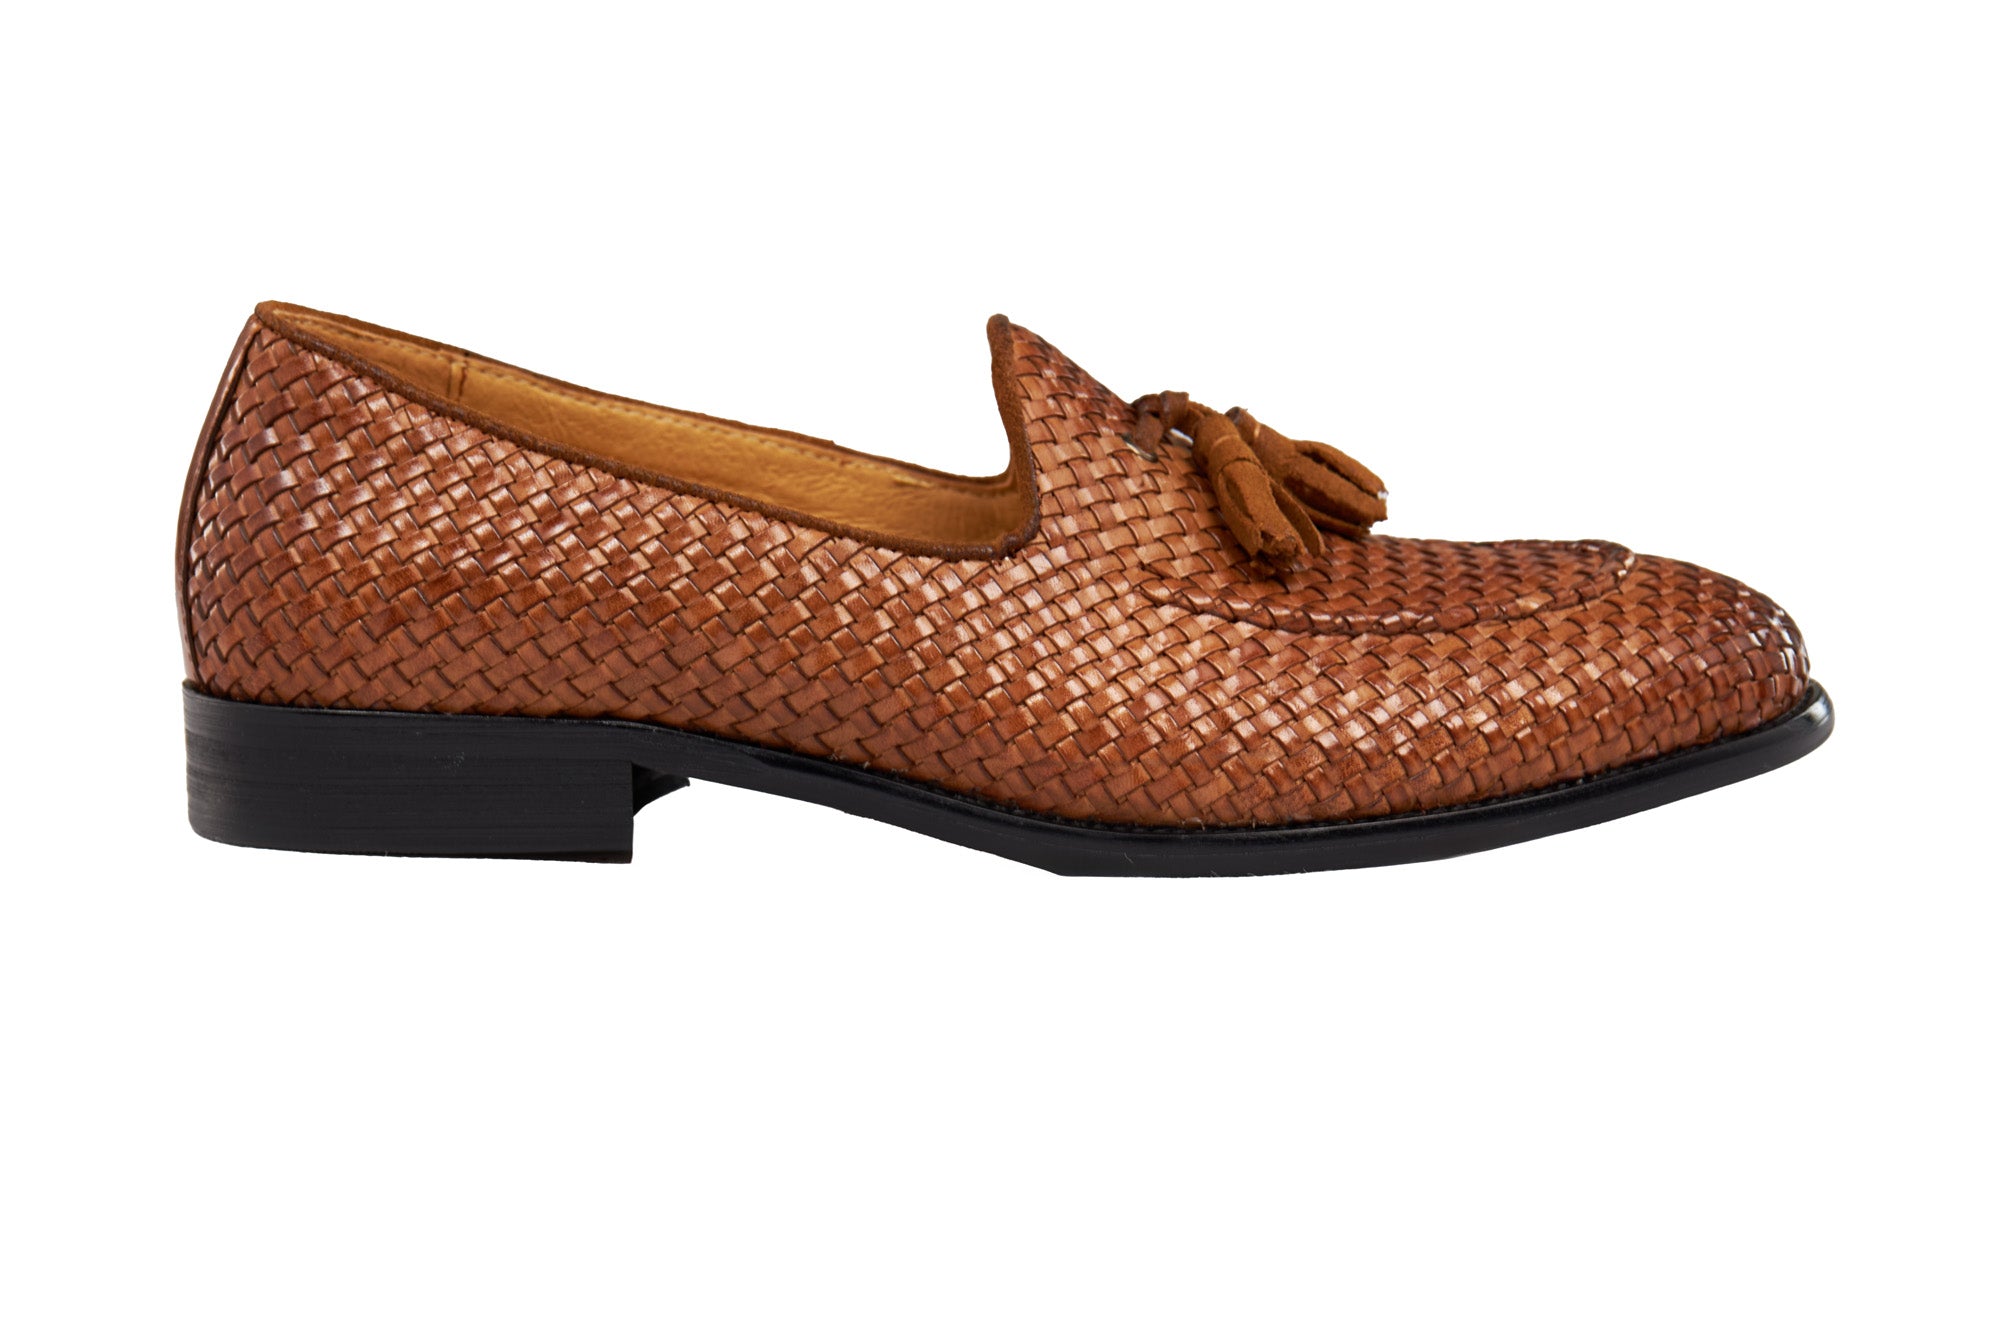 TAN WOVEN LEATHER TASSEL LOAFER